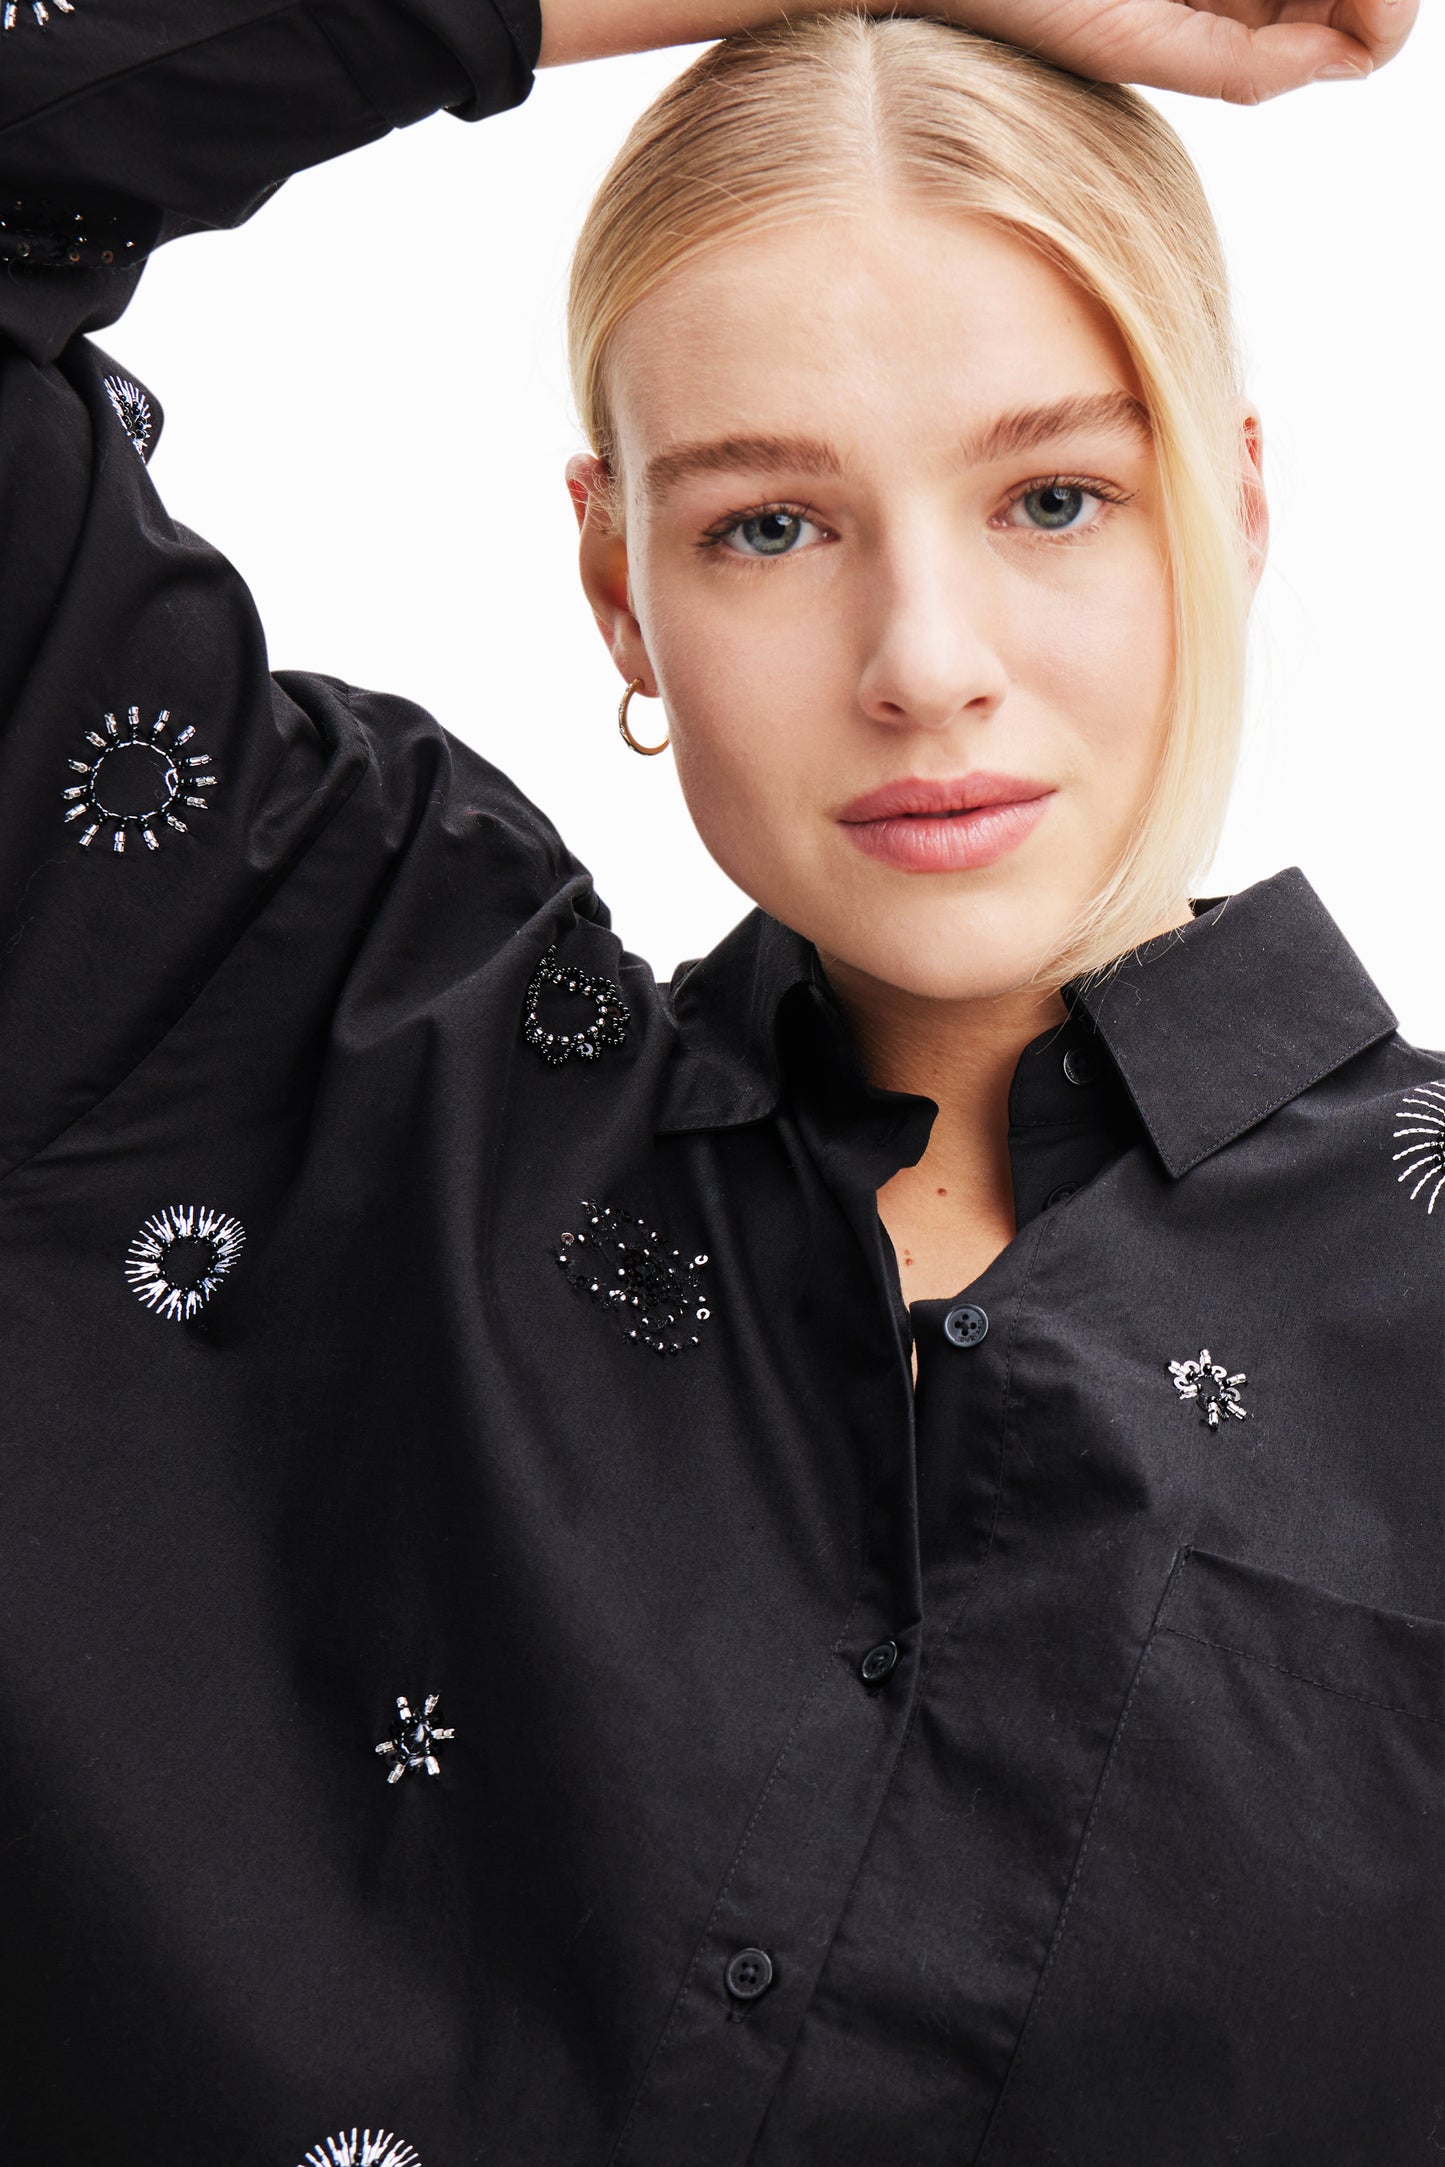 Desigual Oversize Embroidered Shirt - Above The Crowd Boutique